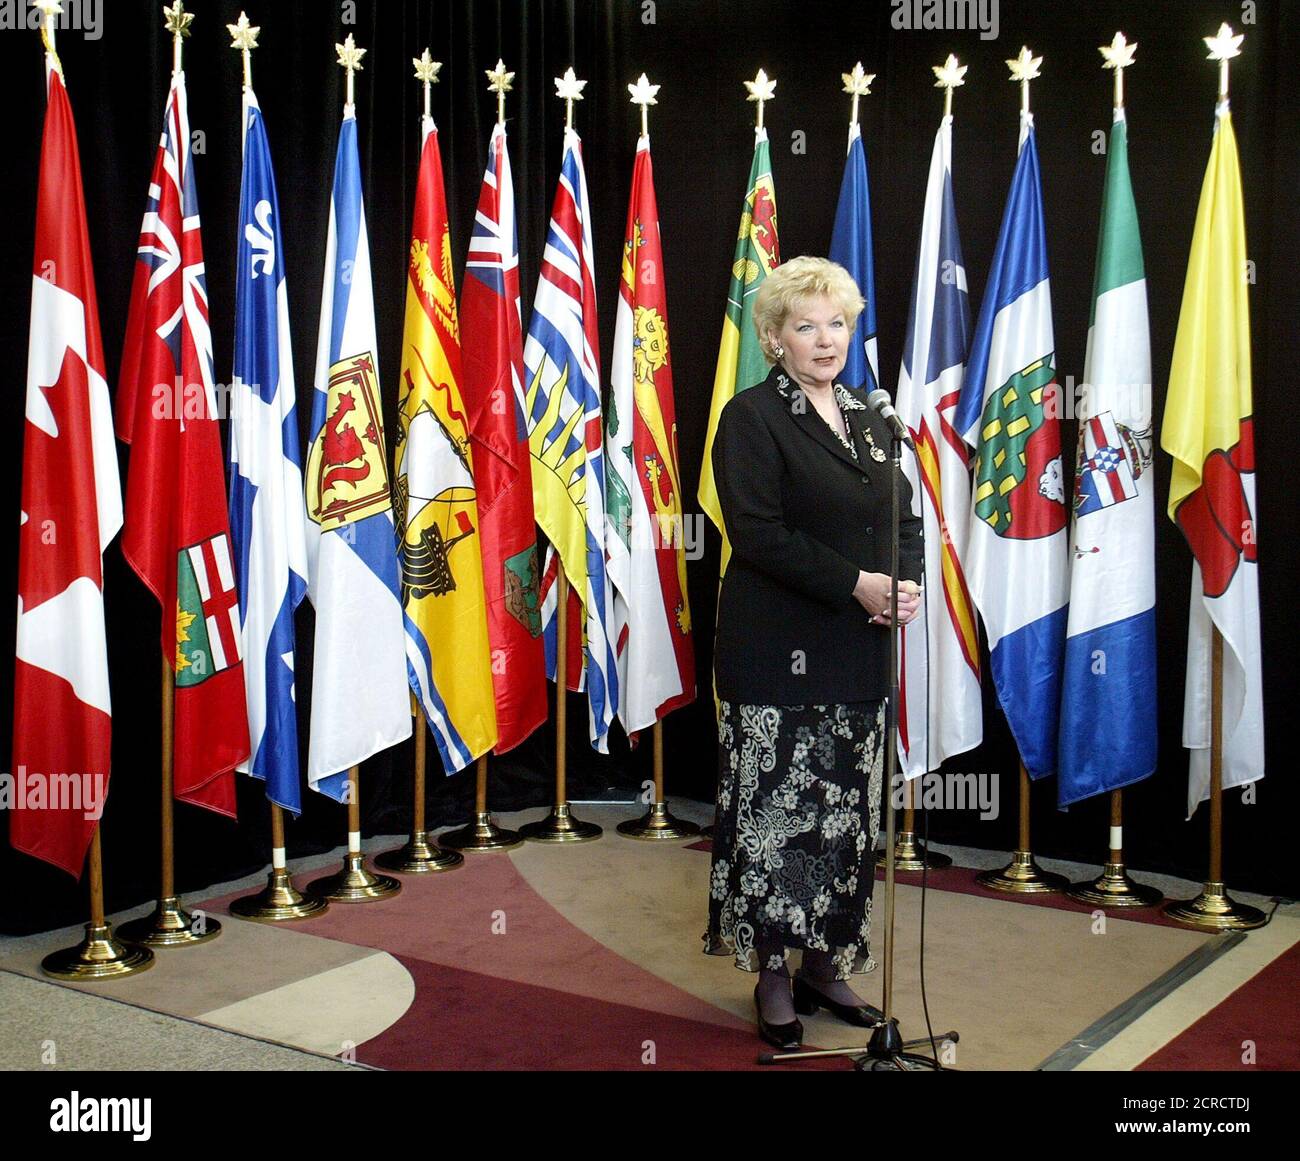 Alberta's Finance Minster Patricia Nelson comments on a meeting with her federal and provincial counterparts in Ottawa, October 10, 2003. The provinces are united in their hopes of getting an increase in funds and a change to the calculation in equalization payments. REUTERS/Jim Young  JY Stock Photo